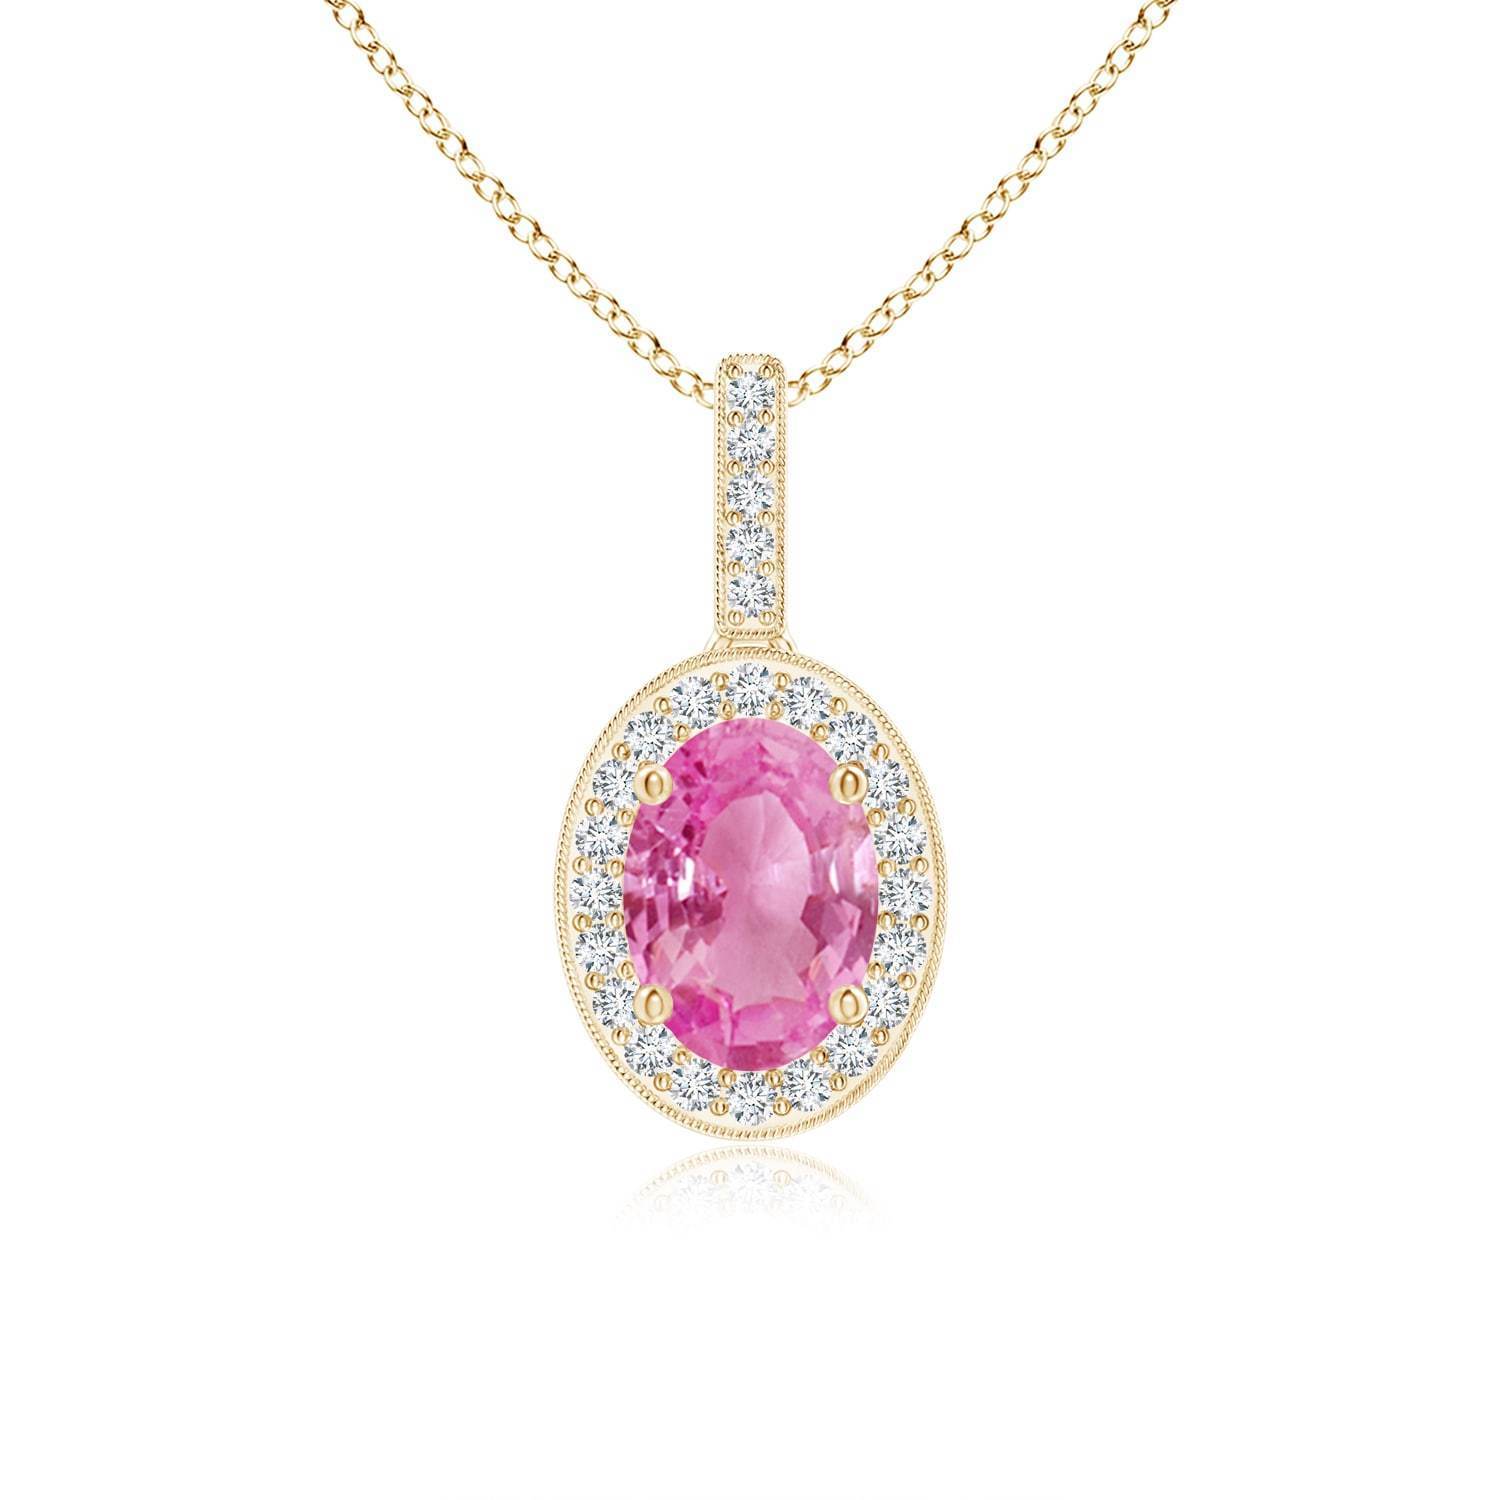 Vintage Inspired Oval Pink Sapphire Pendant Necklace With Diamond Halo